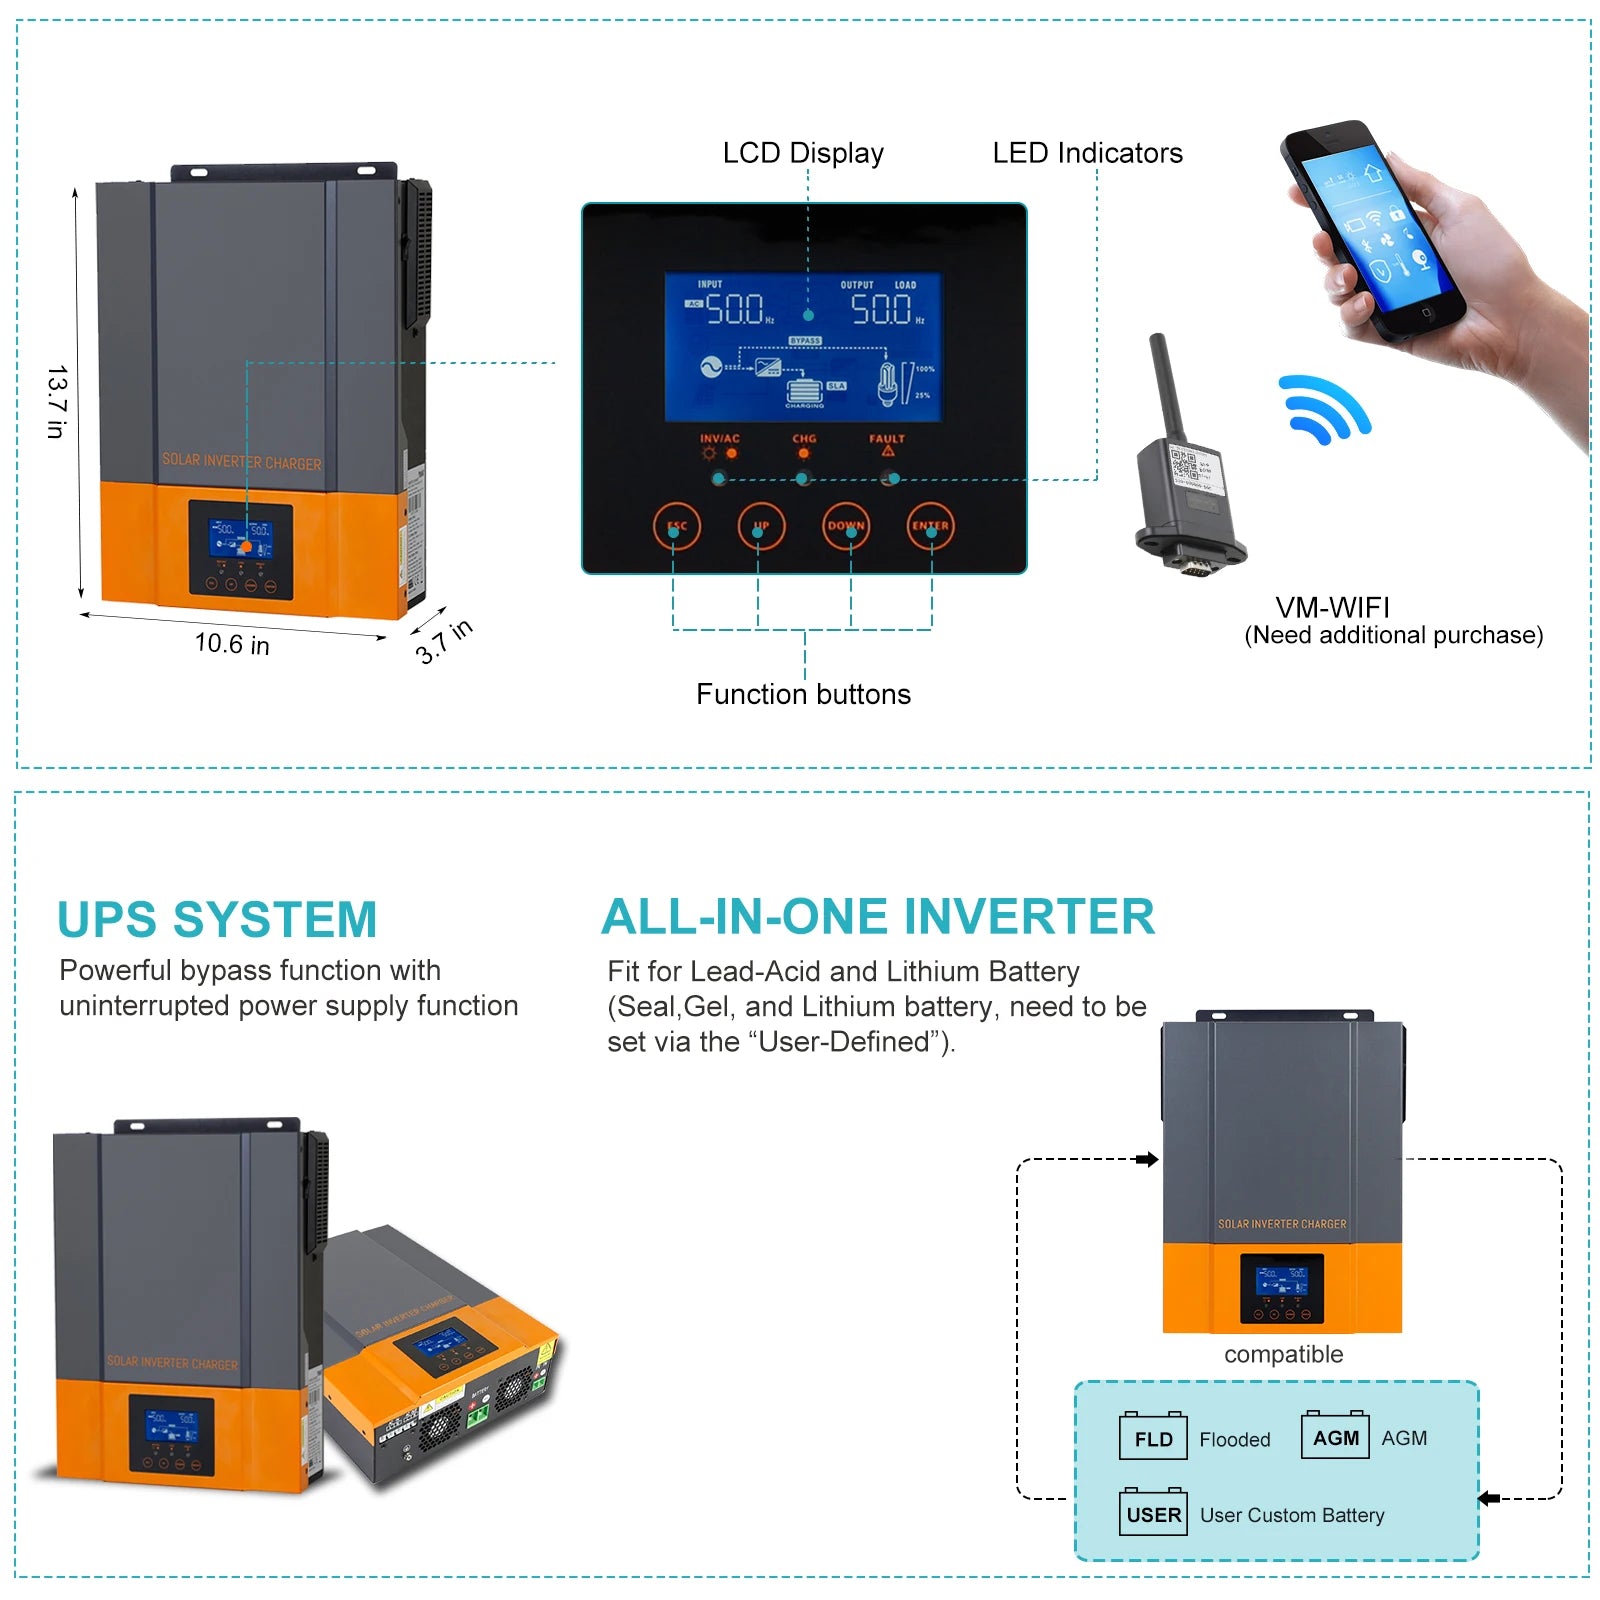 PowMr Hybrid Solar Inverter for charging batteries and providing backup power with LCD display and customizable settings.